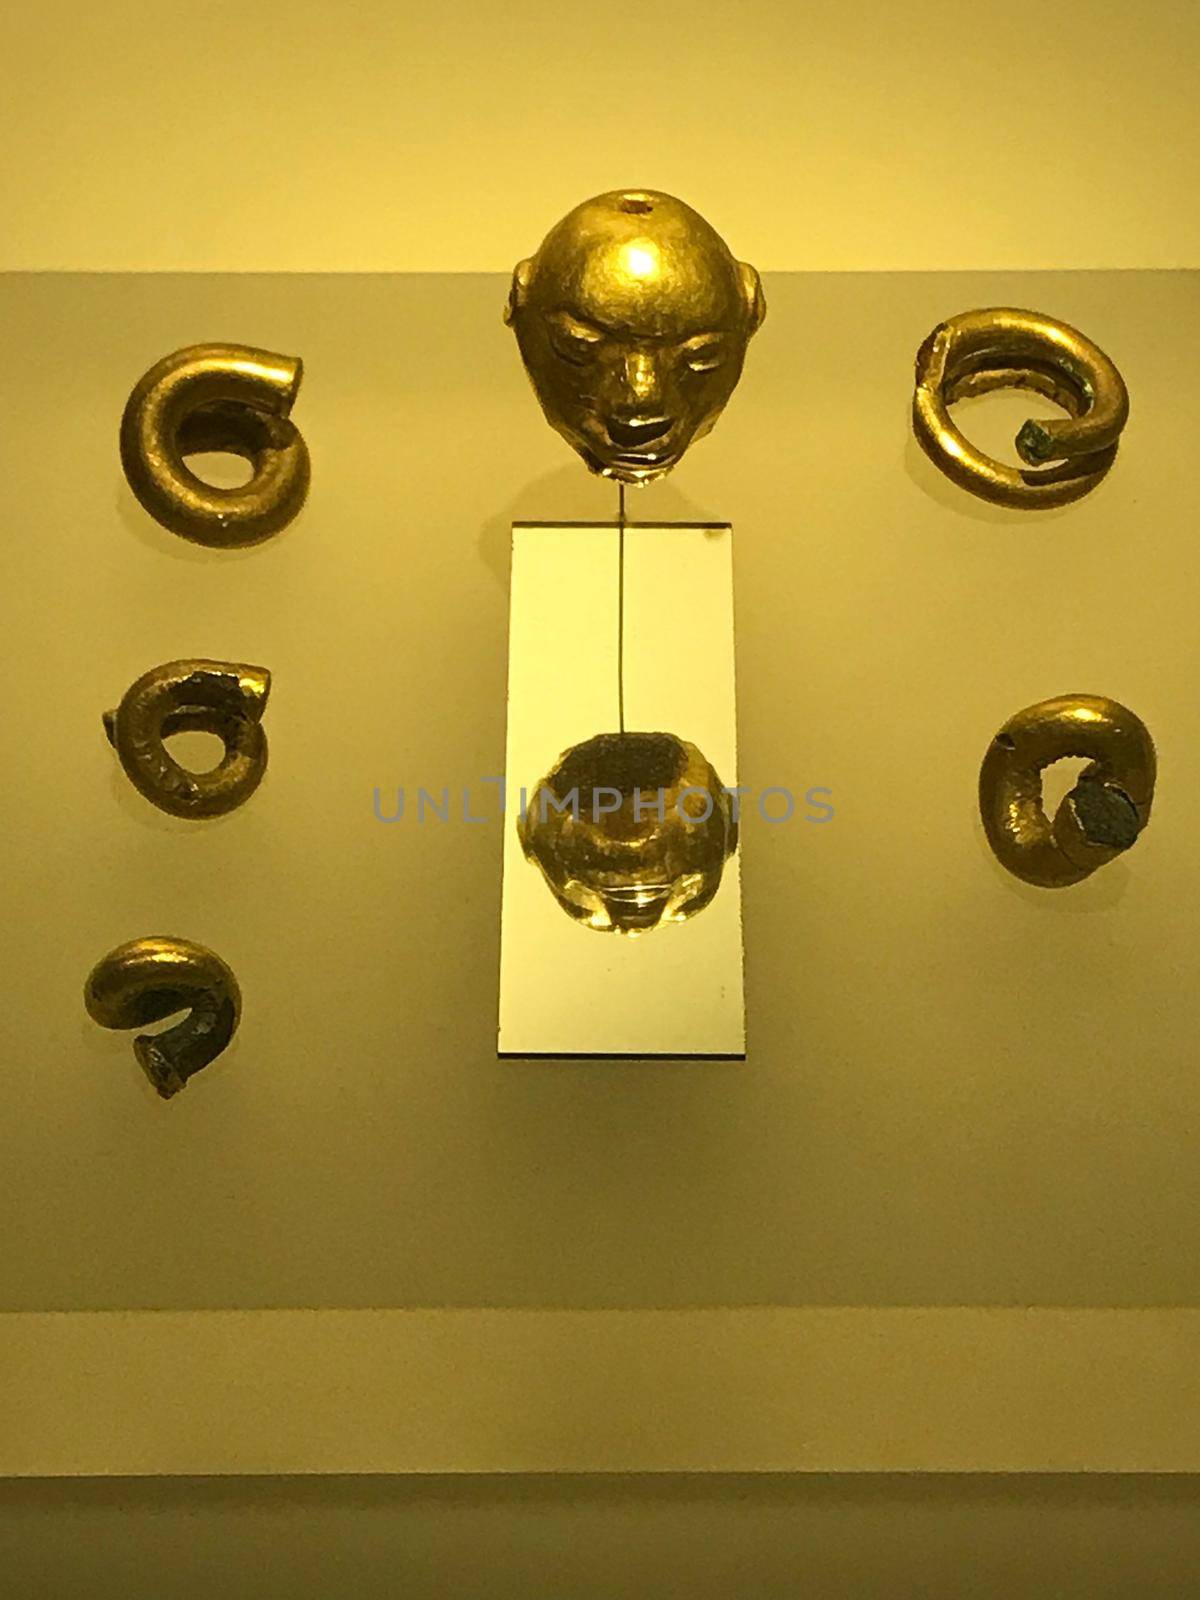 Gold artifacts forming a face and difference animal figurines by jyurinko